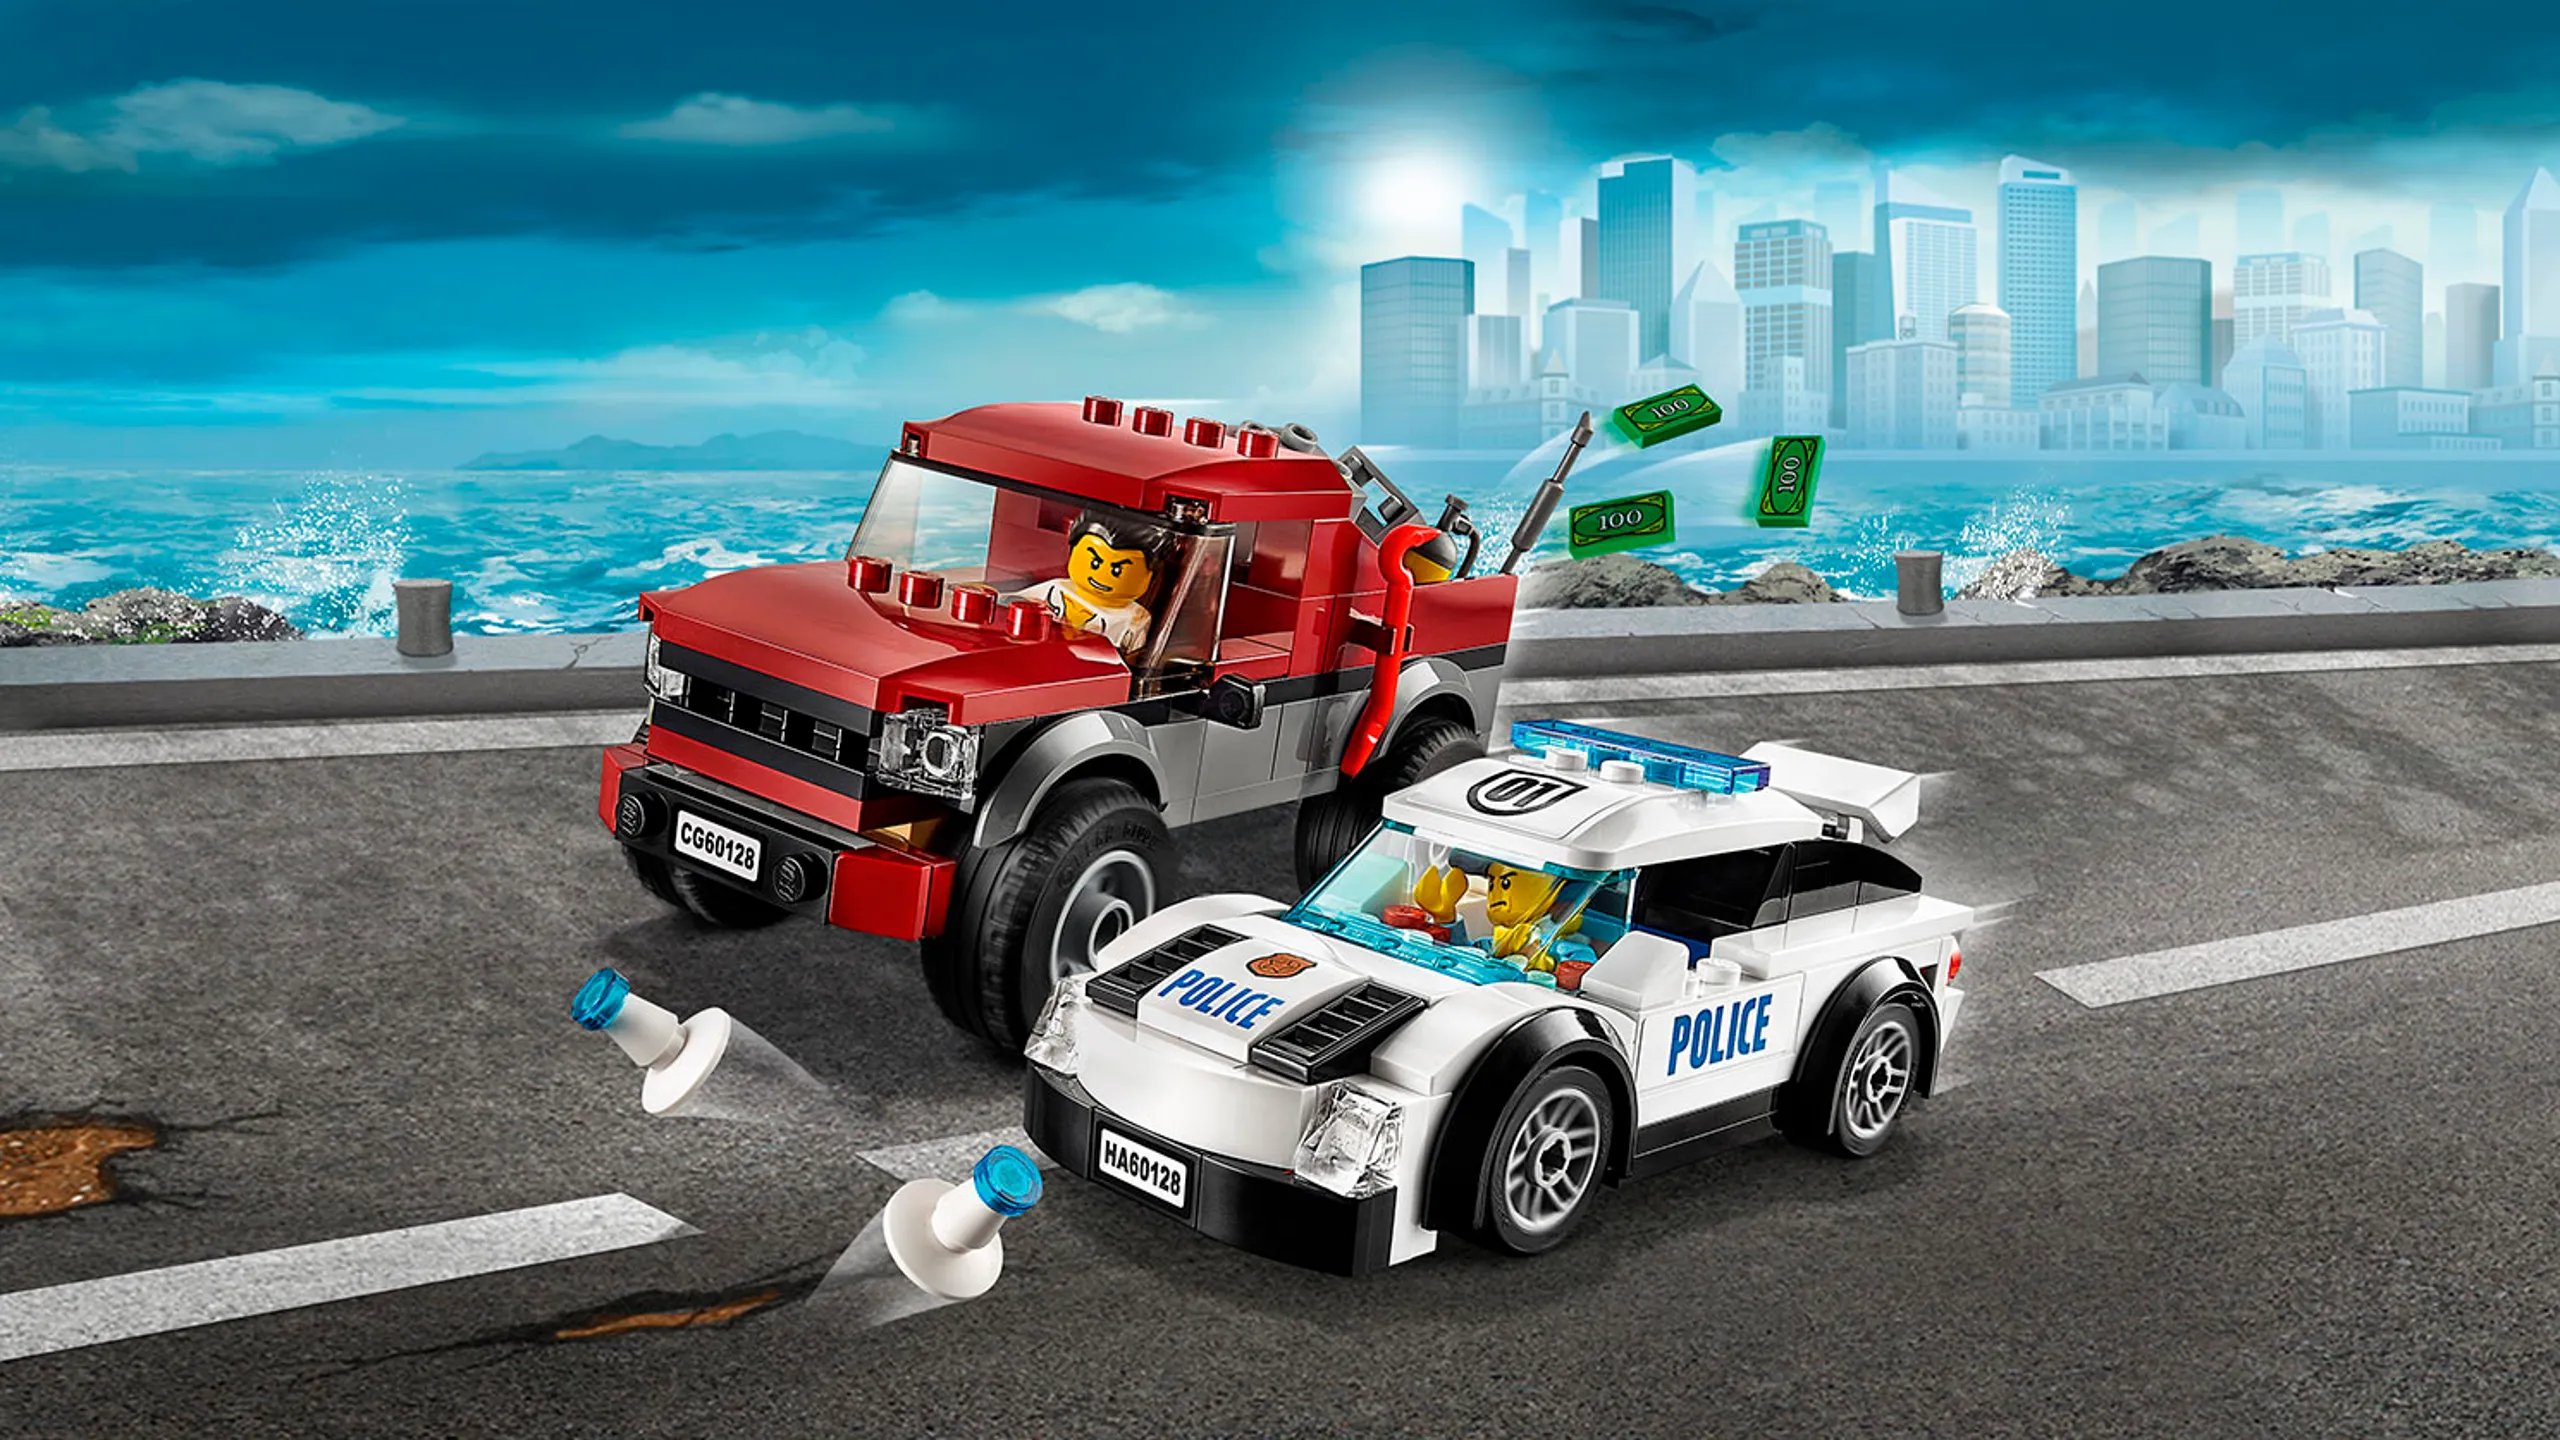 LEGO City pickup truck and police supercar – Police Pursuit 60128